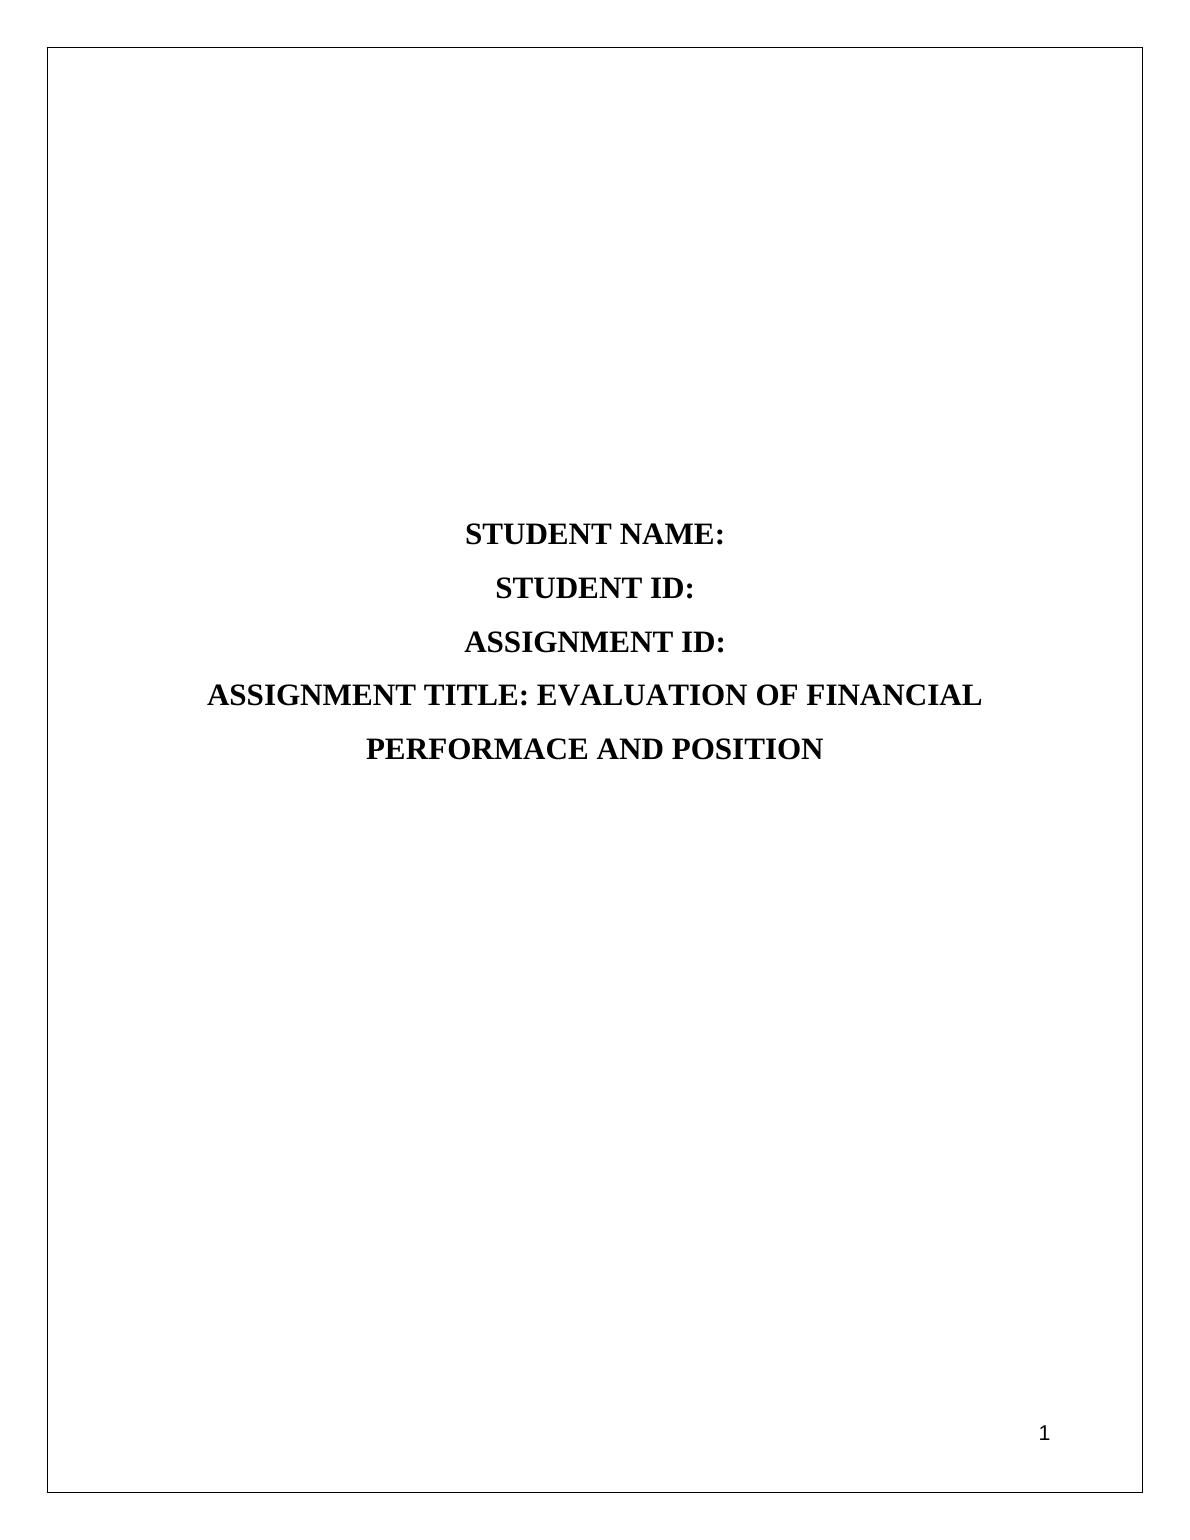 Evaluation of Financial Performance | Assignment_1